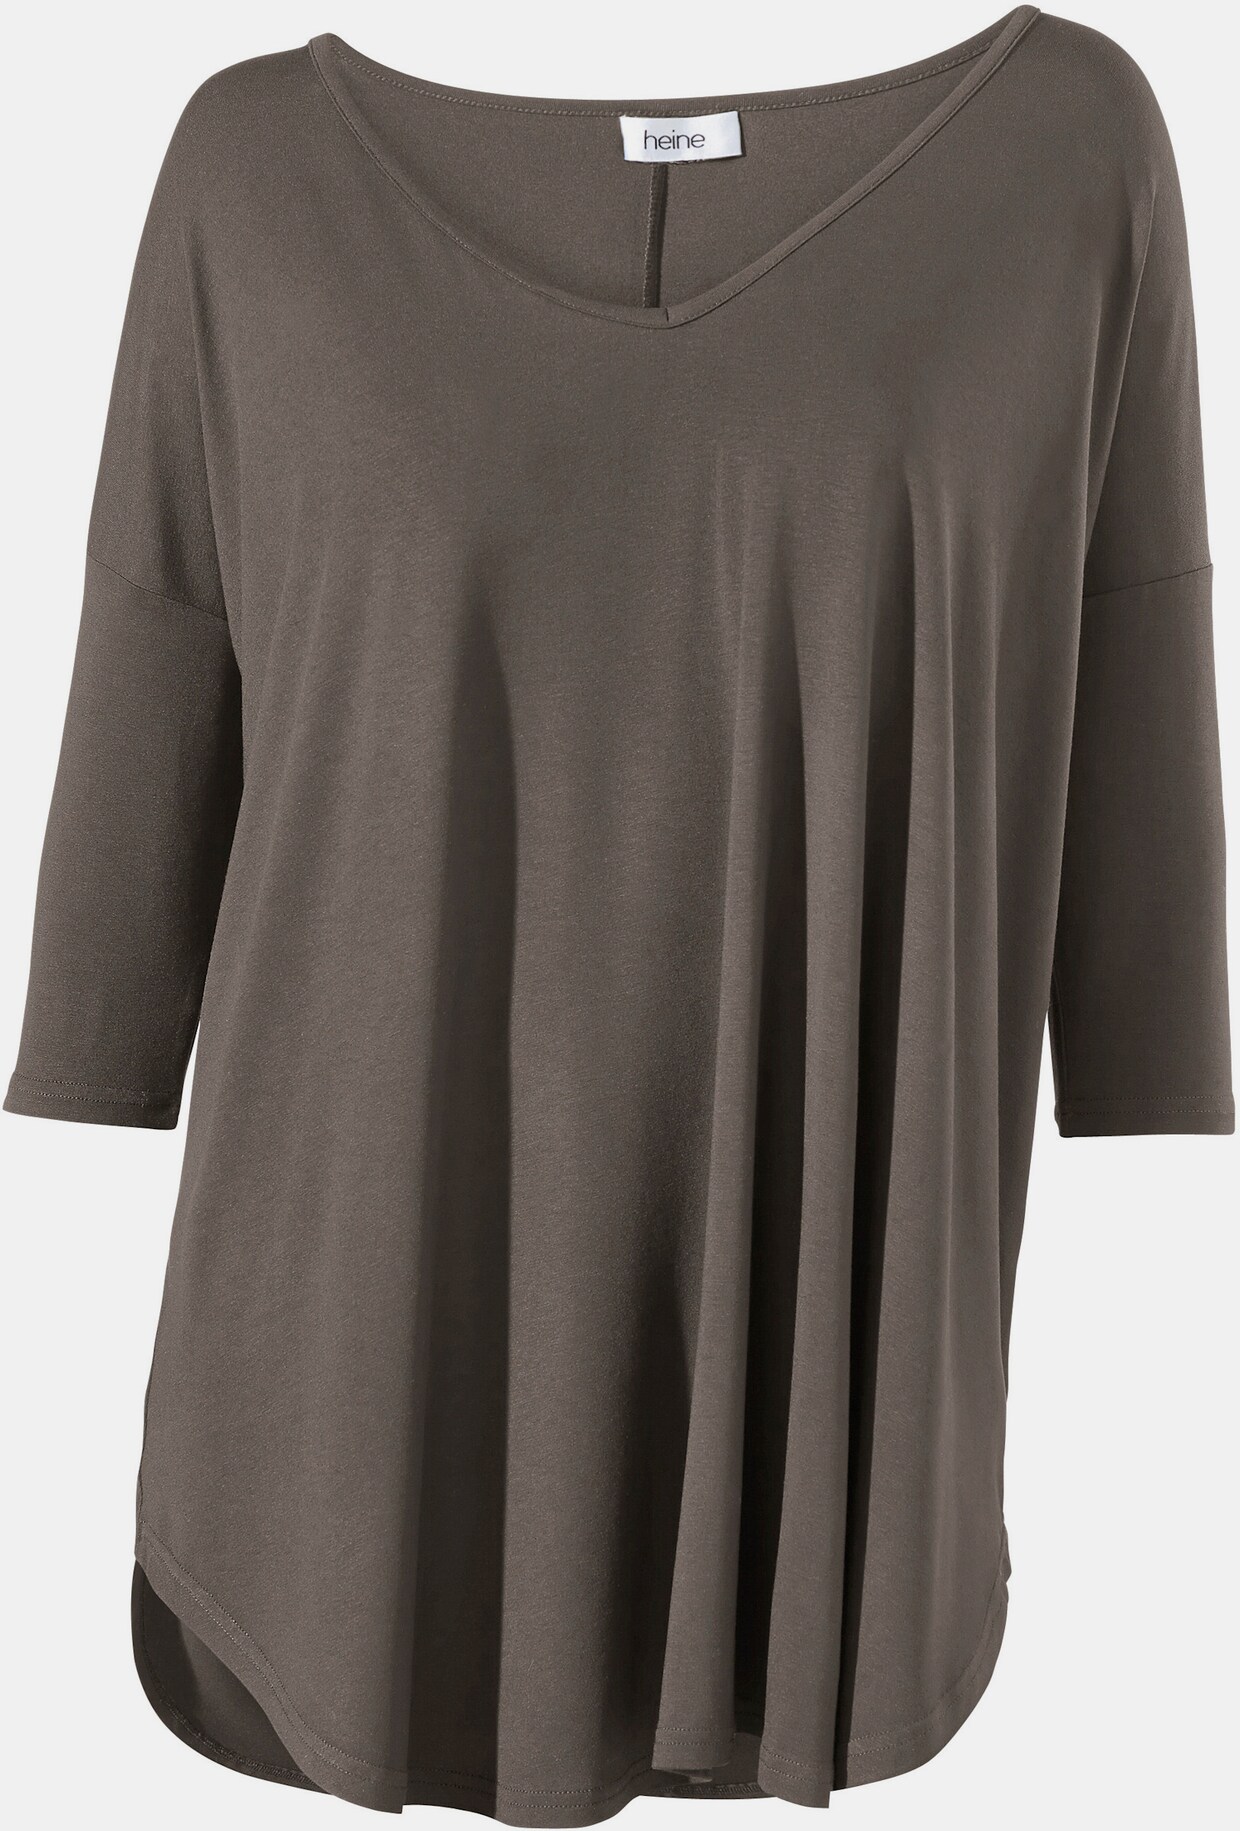 heine T-shirt ample - taupe